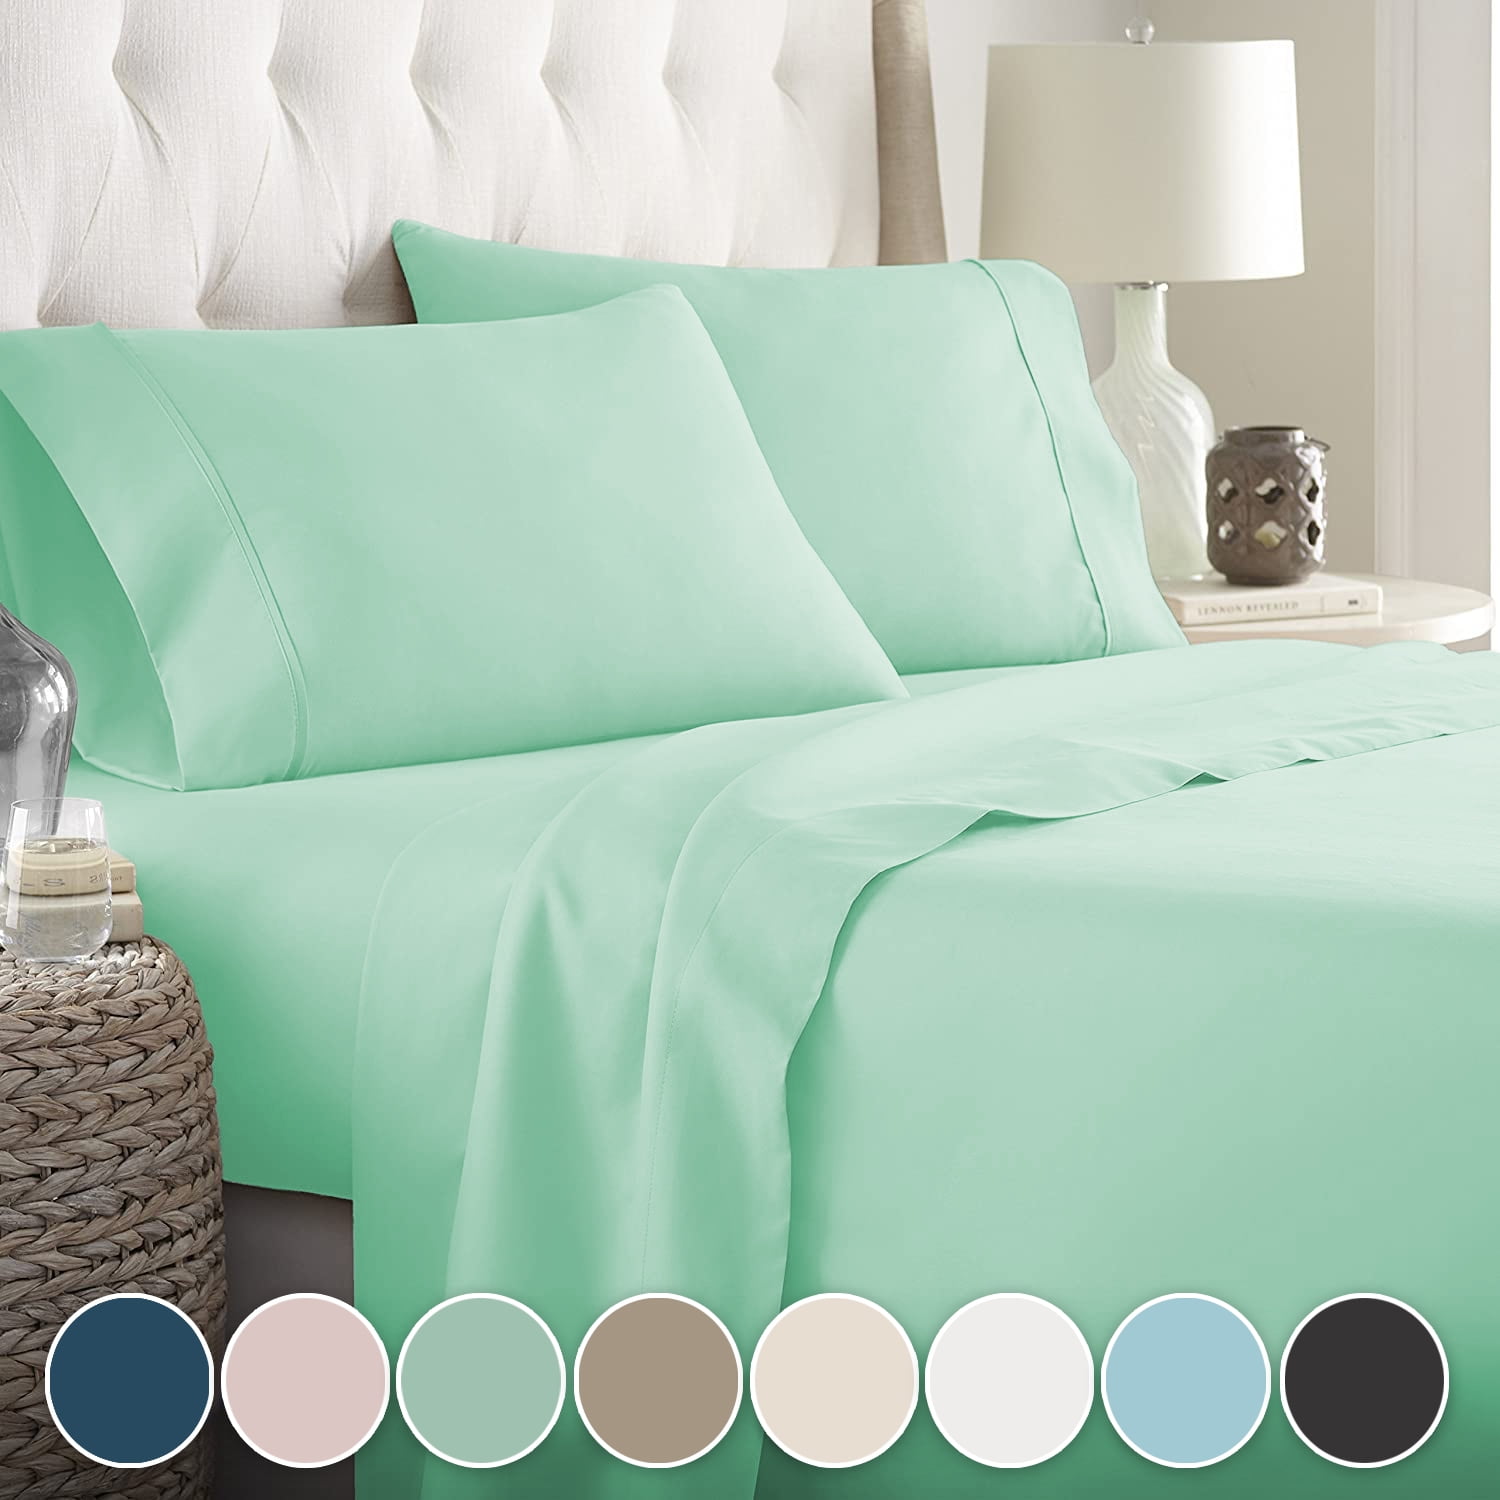 Elasticated Fitted bed Sheet for DOUBLE bed Mint Green Colour sheet 56 Picks 